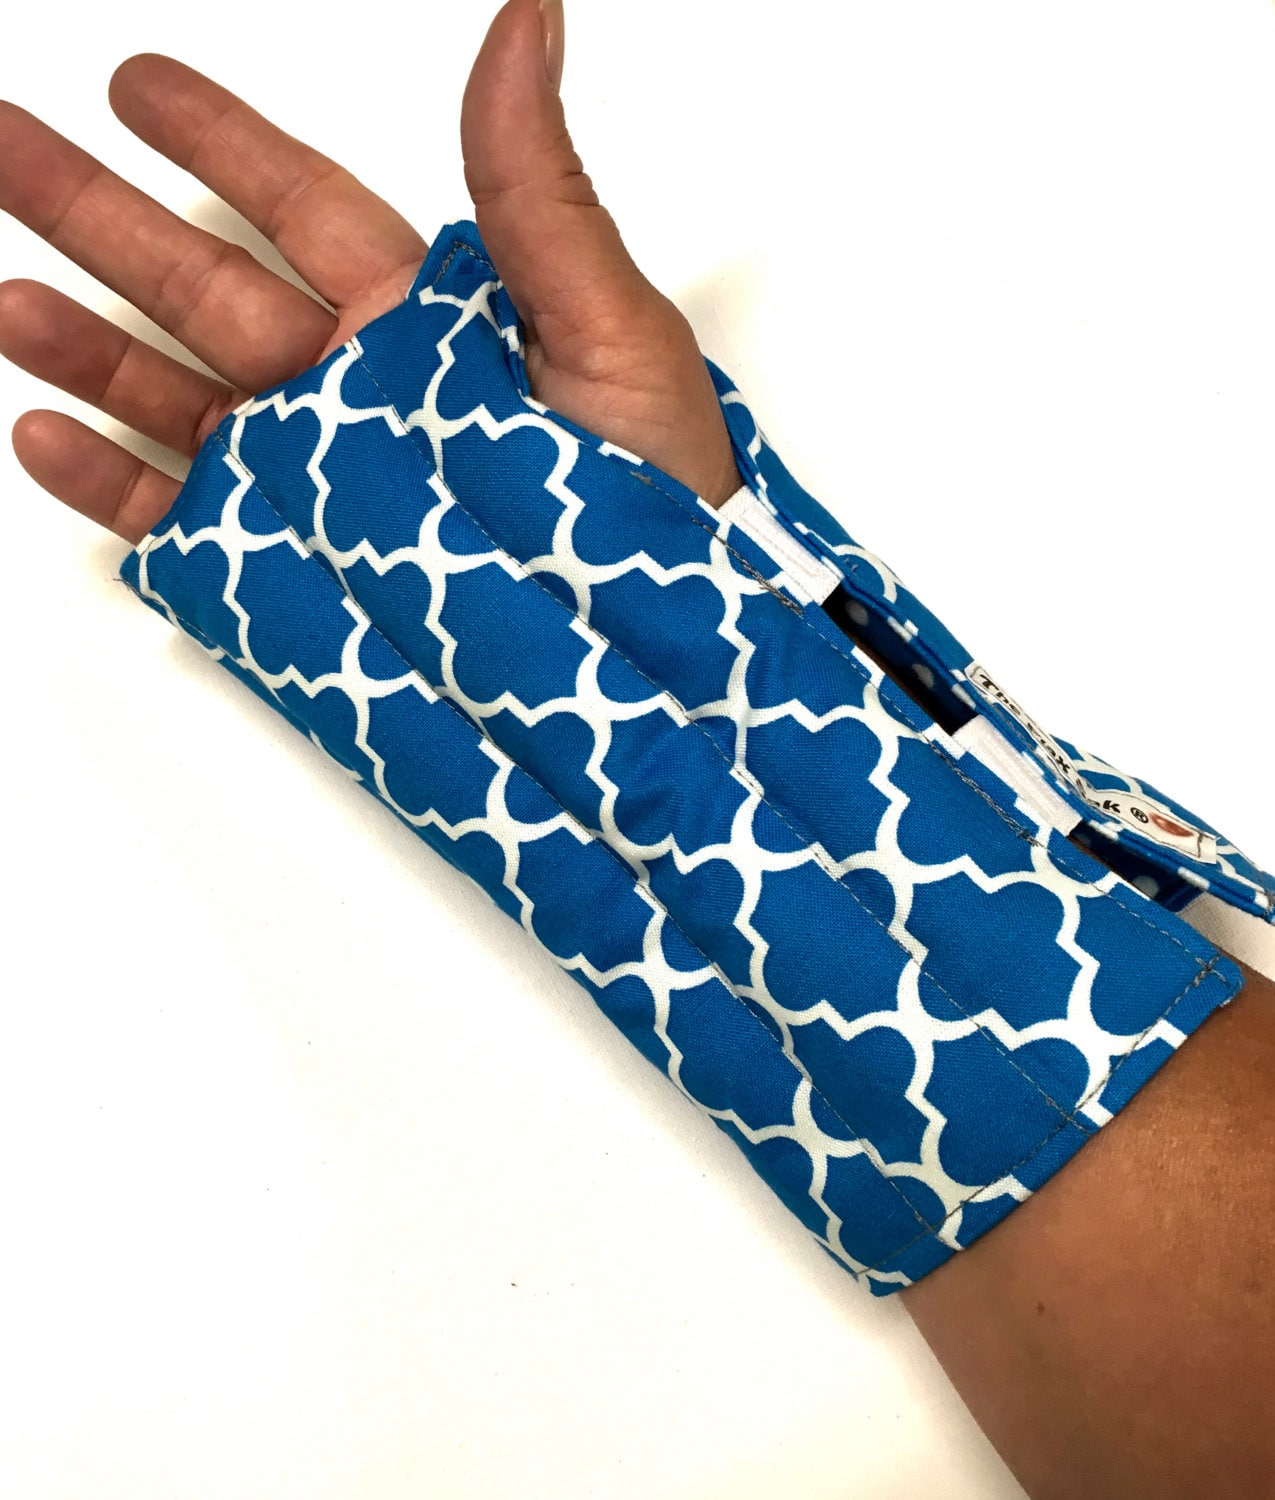 1 Wrist And Hand Heat Wrap Carpal Tunnel Relief By Lalatextures